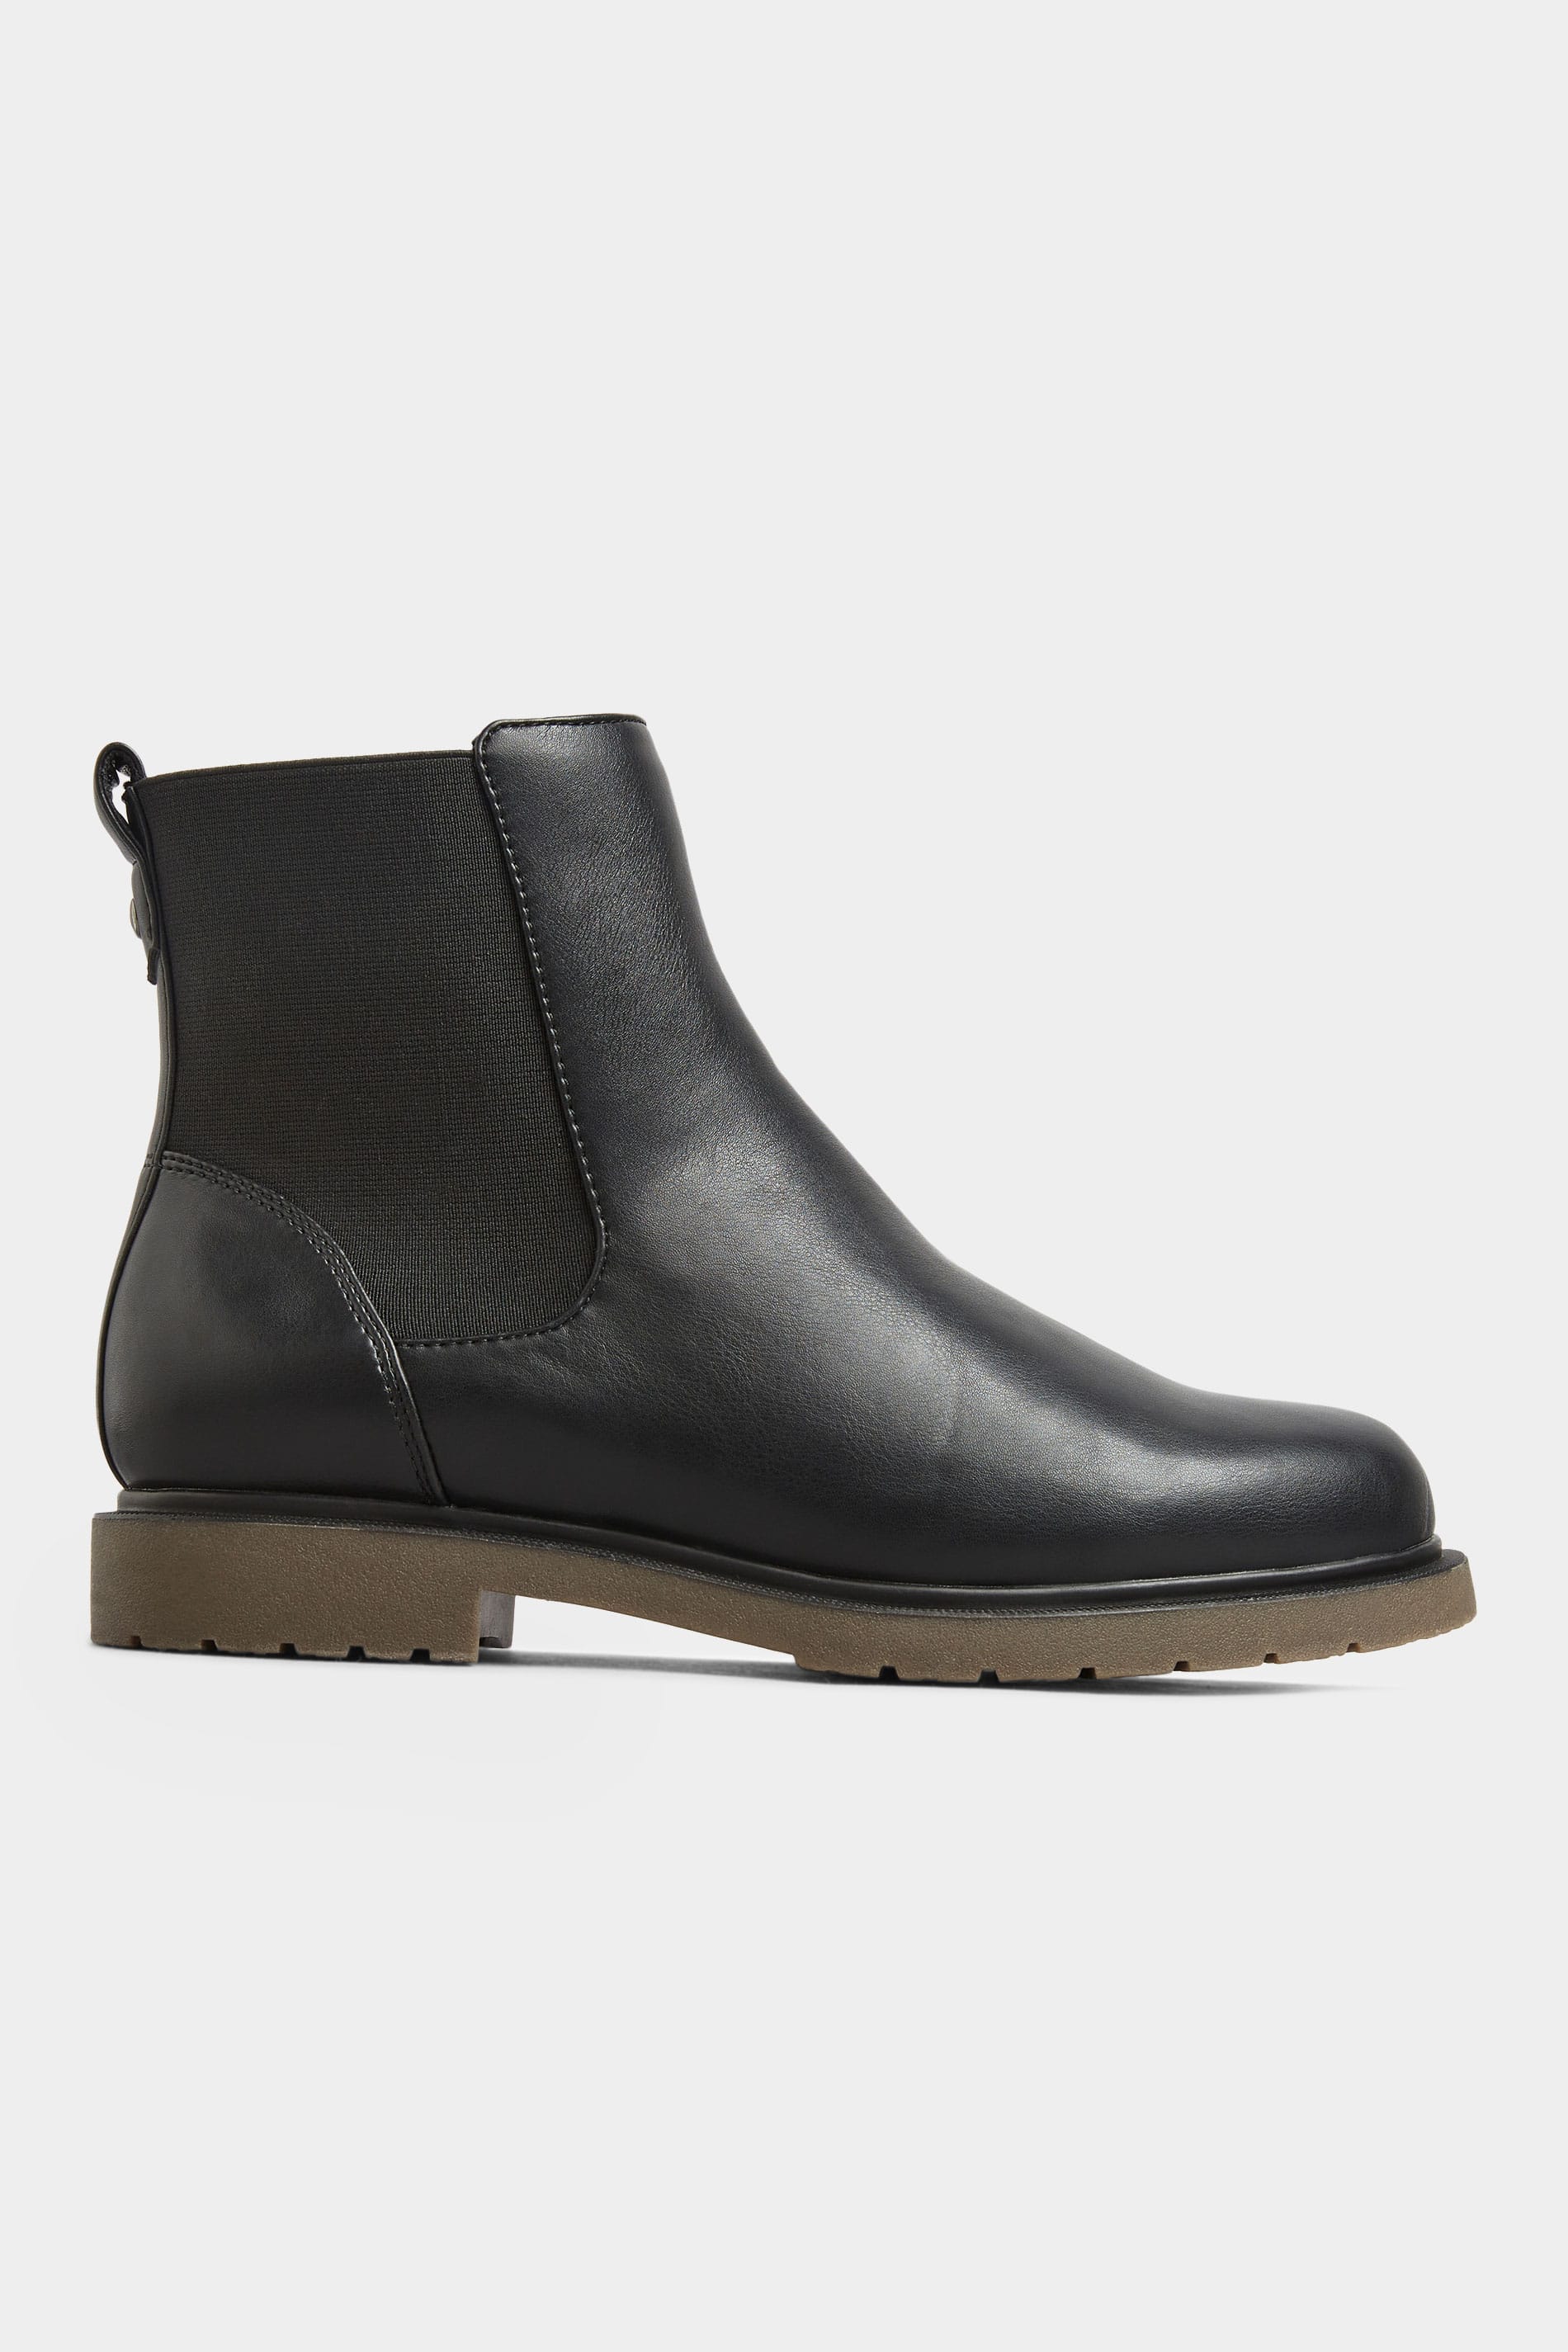 Black Vegan Leather Chunky Chelsea Boots In Extra Wide Fit | Long Tall ...